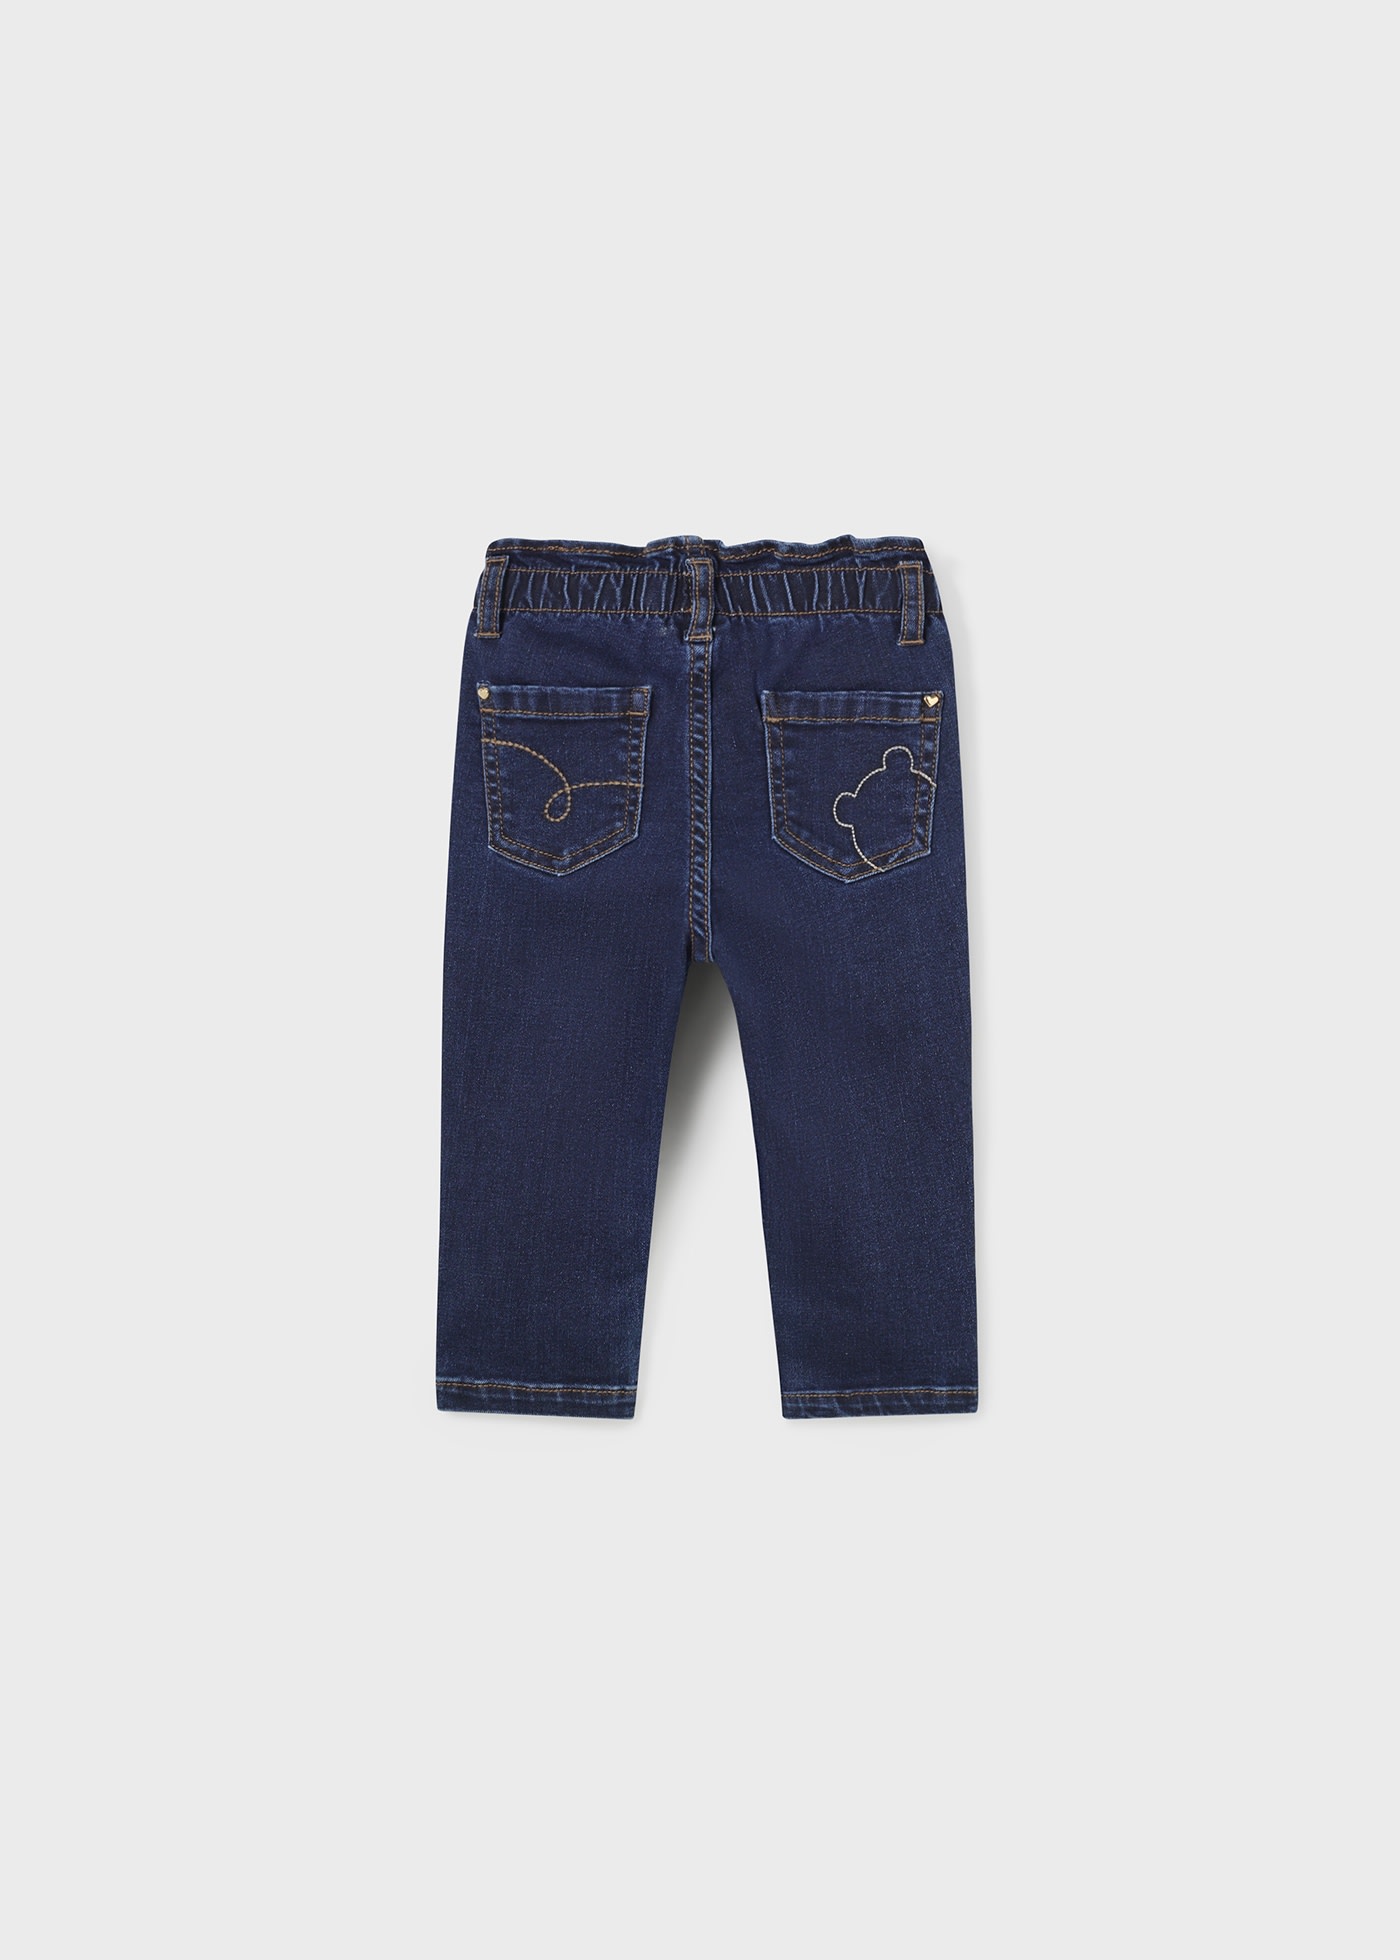 Jeanshose Slouchy Baby